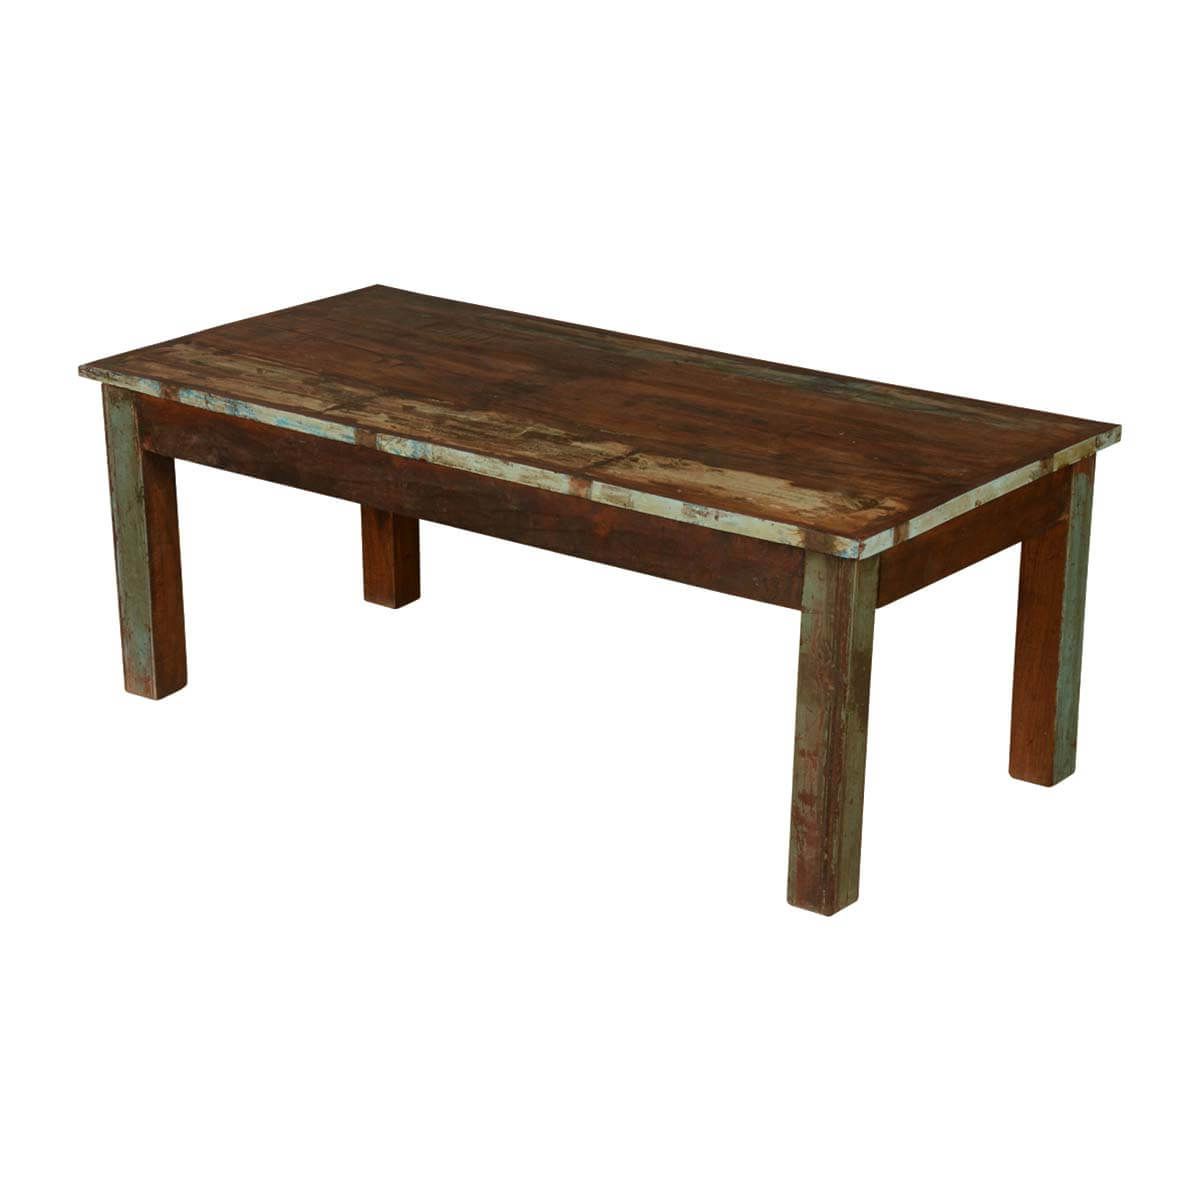 Farmhouse Distressed Reclaimed Wood Rustic Coffee Table Regarding Most Current Square Weathered White Wood Coffee Tables (View 9 of 20)